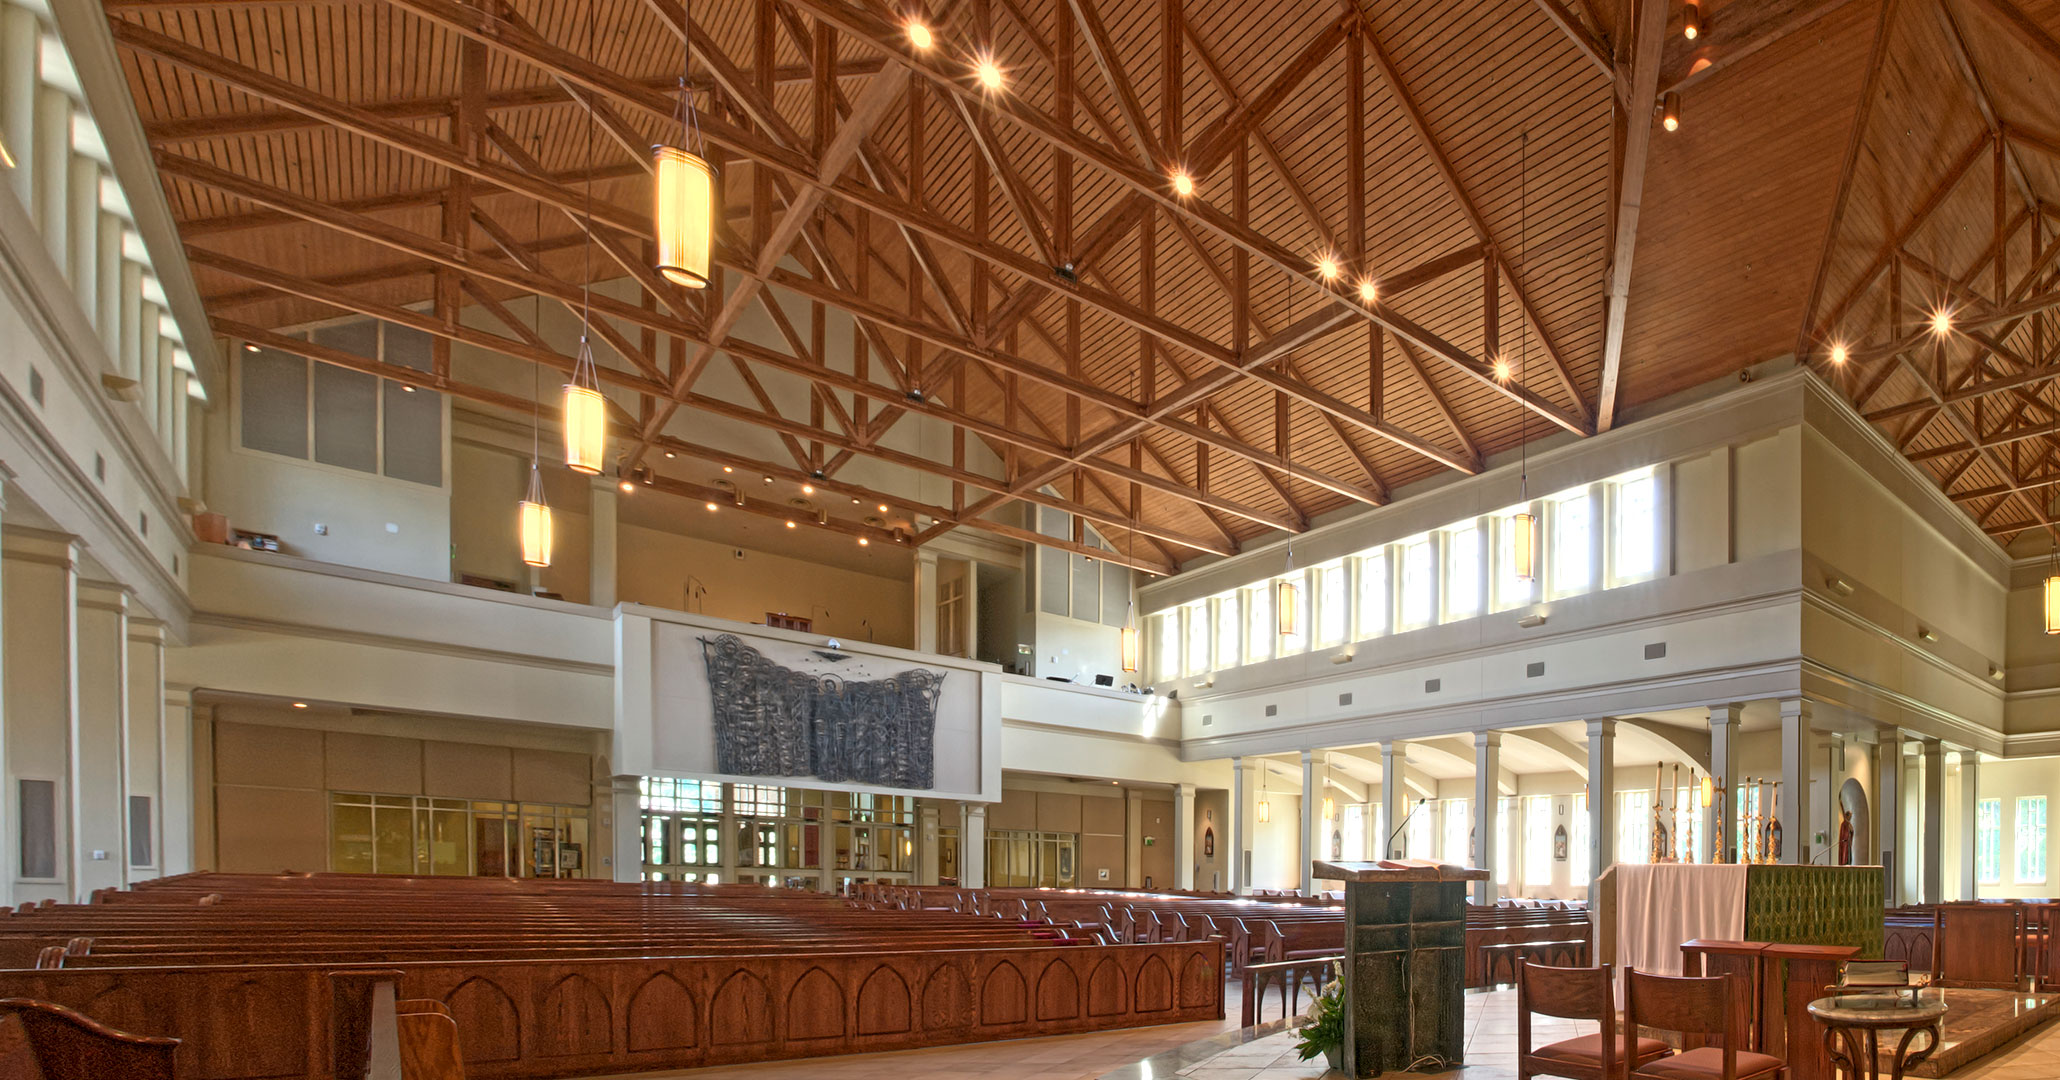 Boudreaux architects worked with St. Mark Catholic Church to create a contemporary interior.